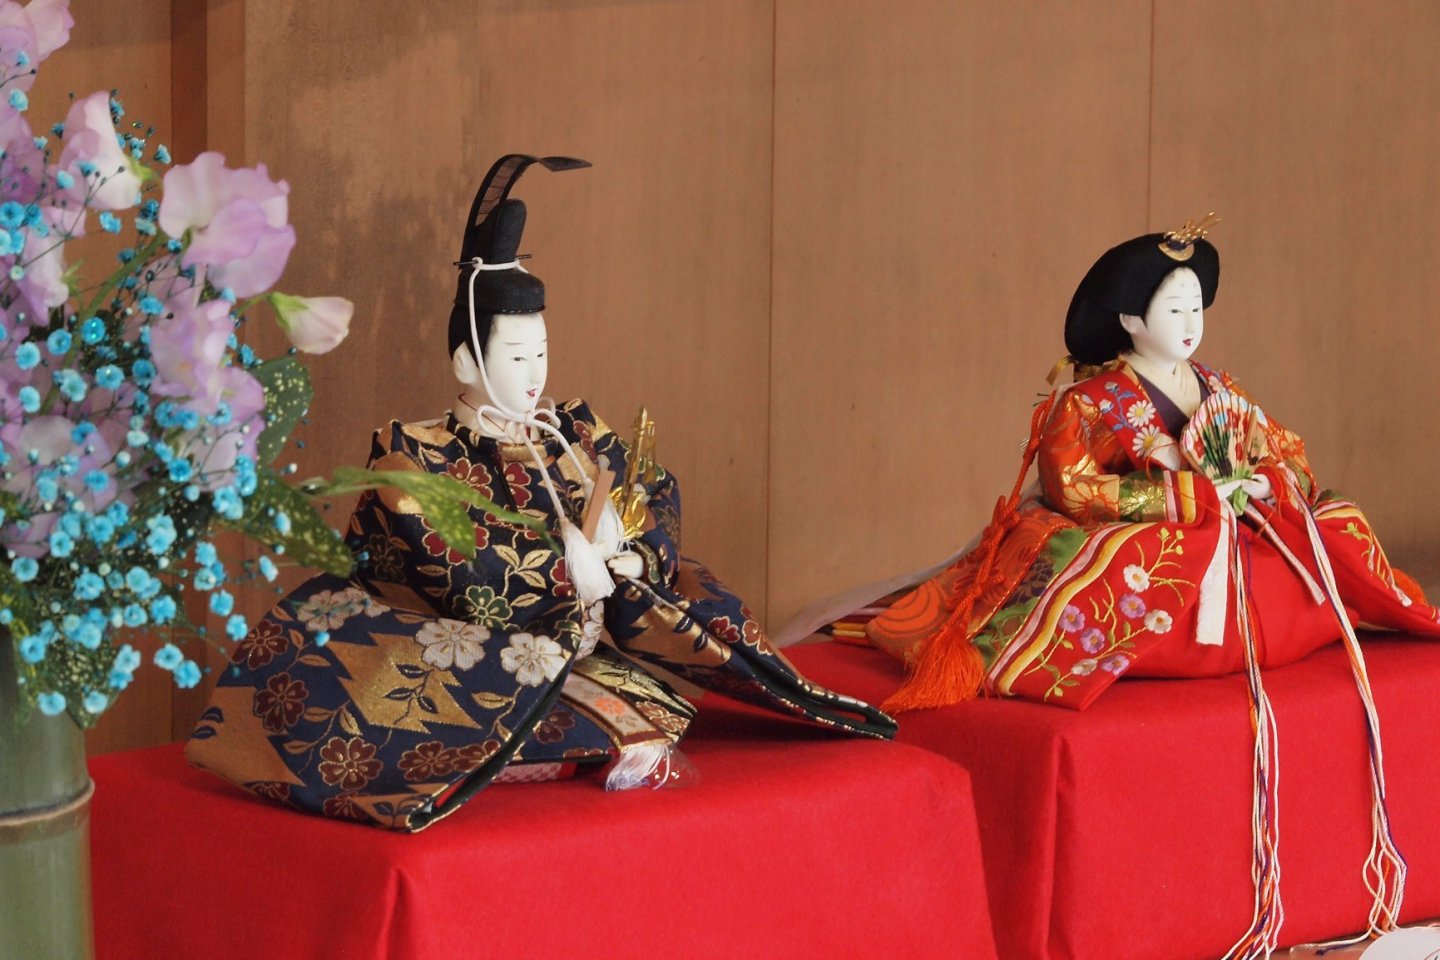 Hina dolls are displayed across many households in Japan for Girls\' Day on March 3rd.